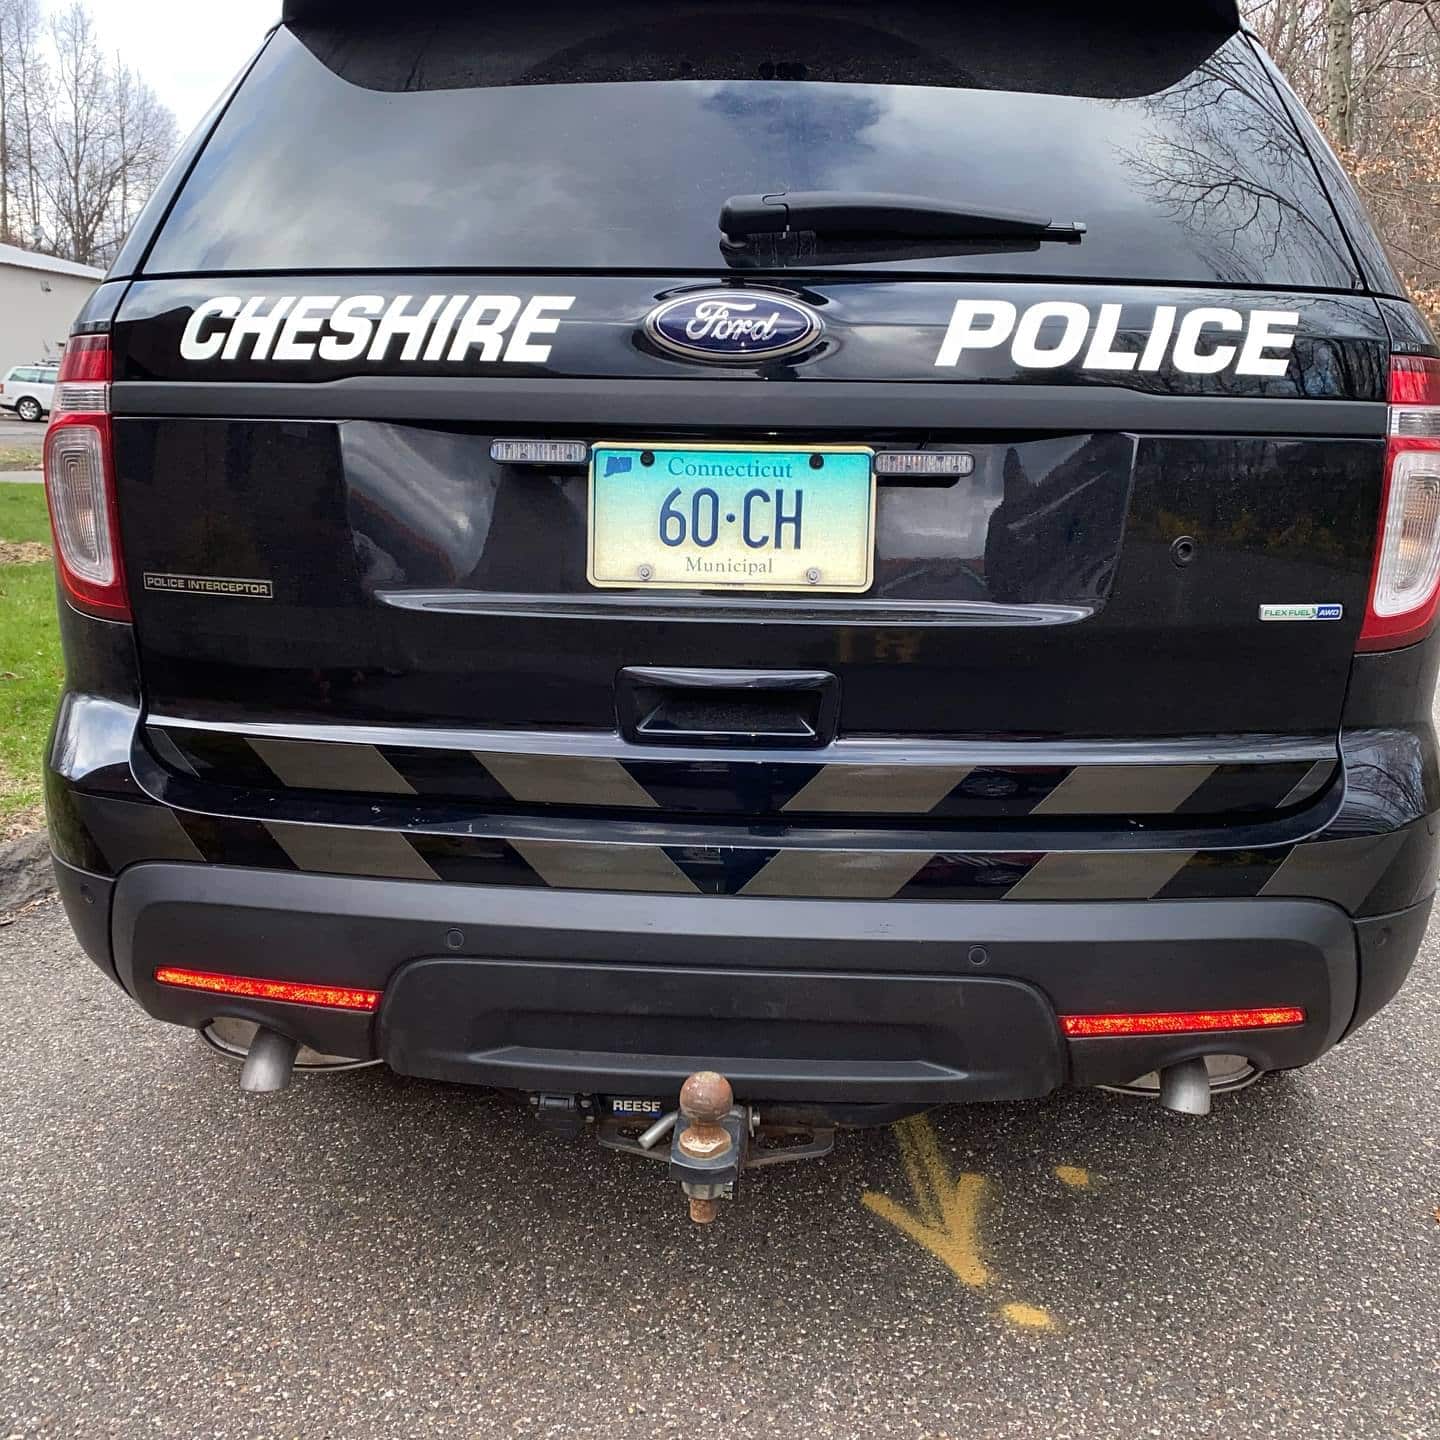 Cheshire Police Wrap 3